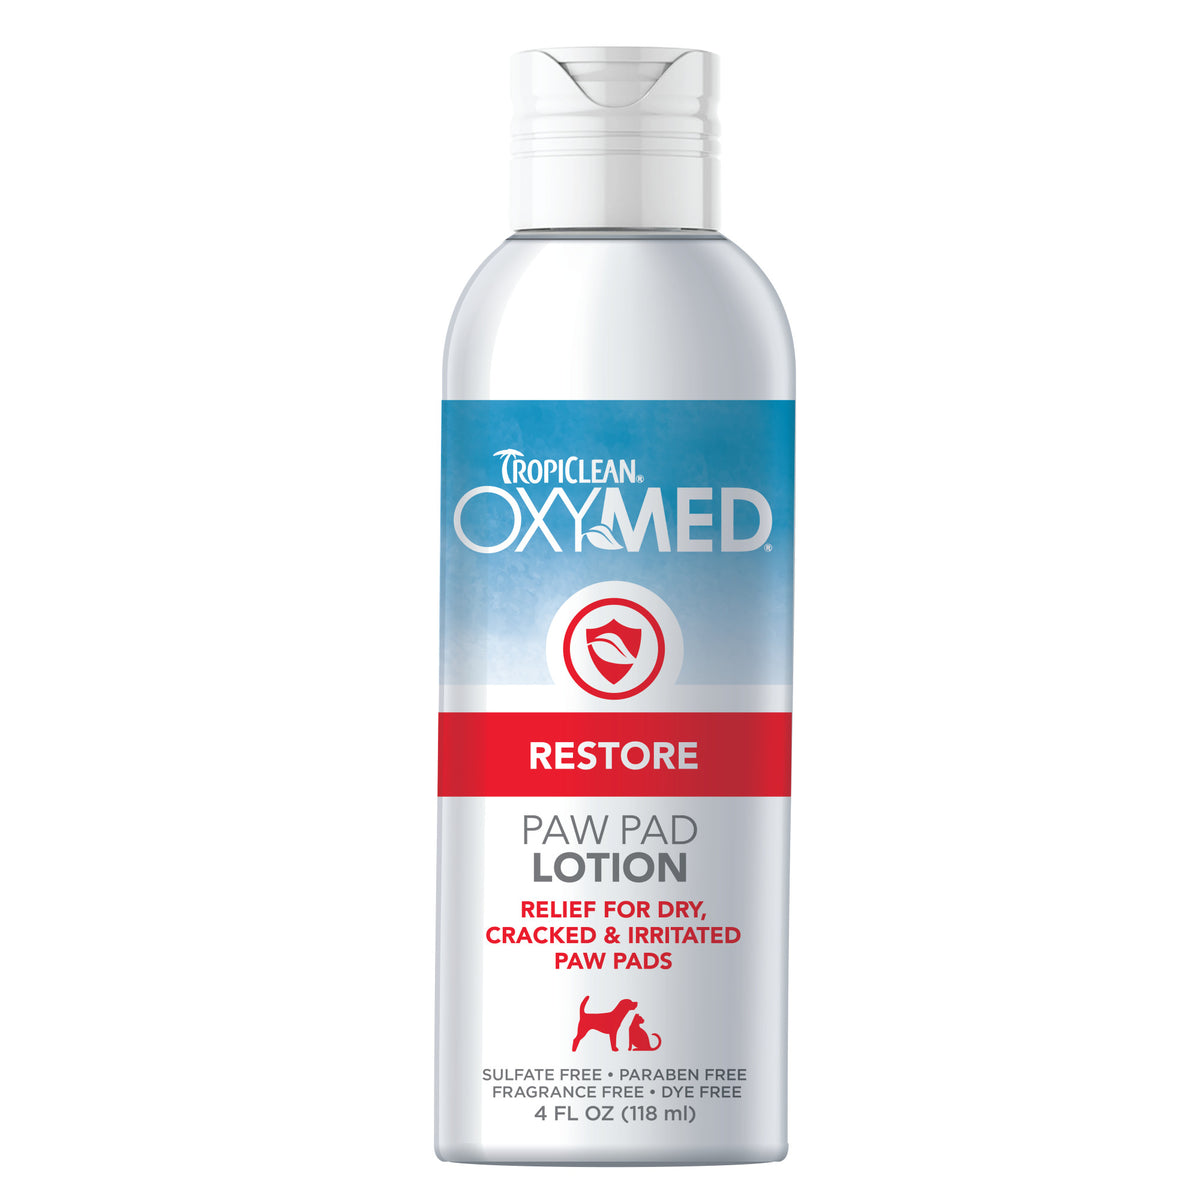 OxyMed Restore Paw Pad